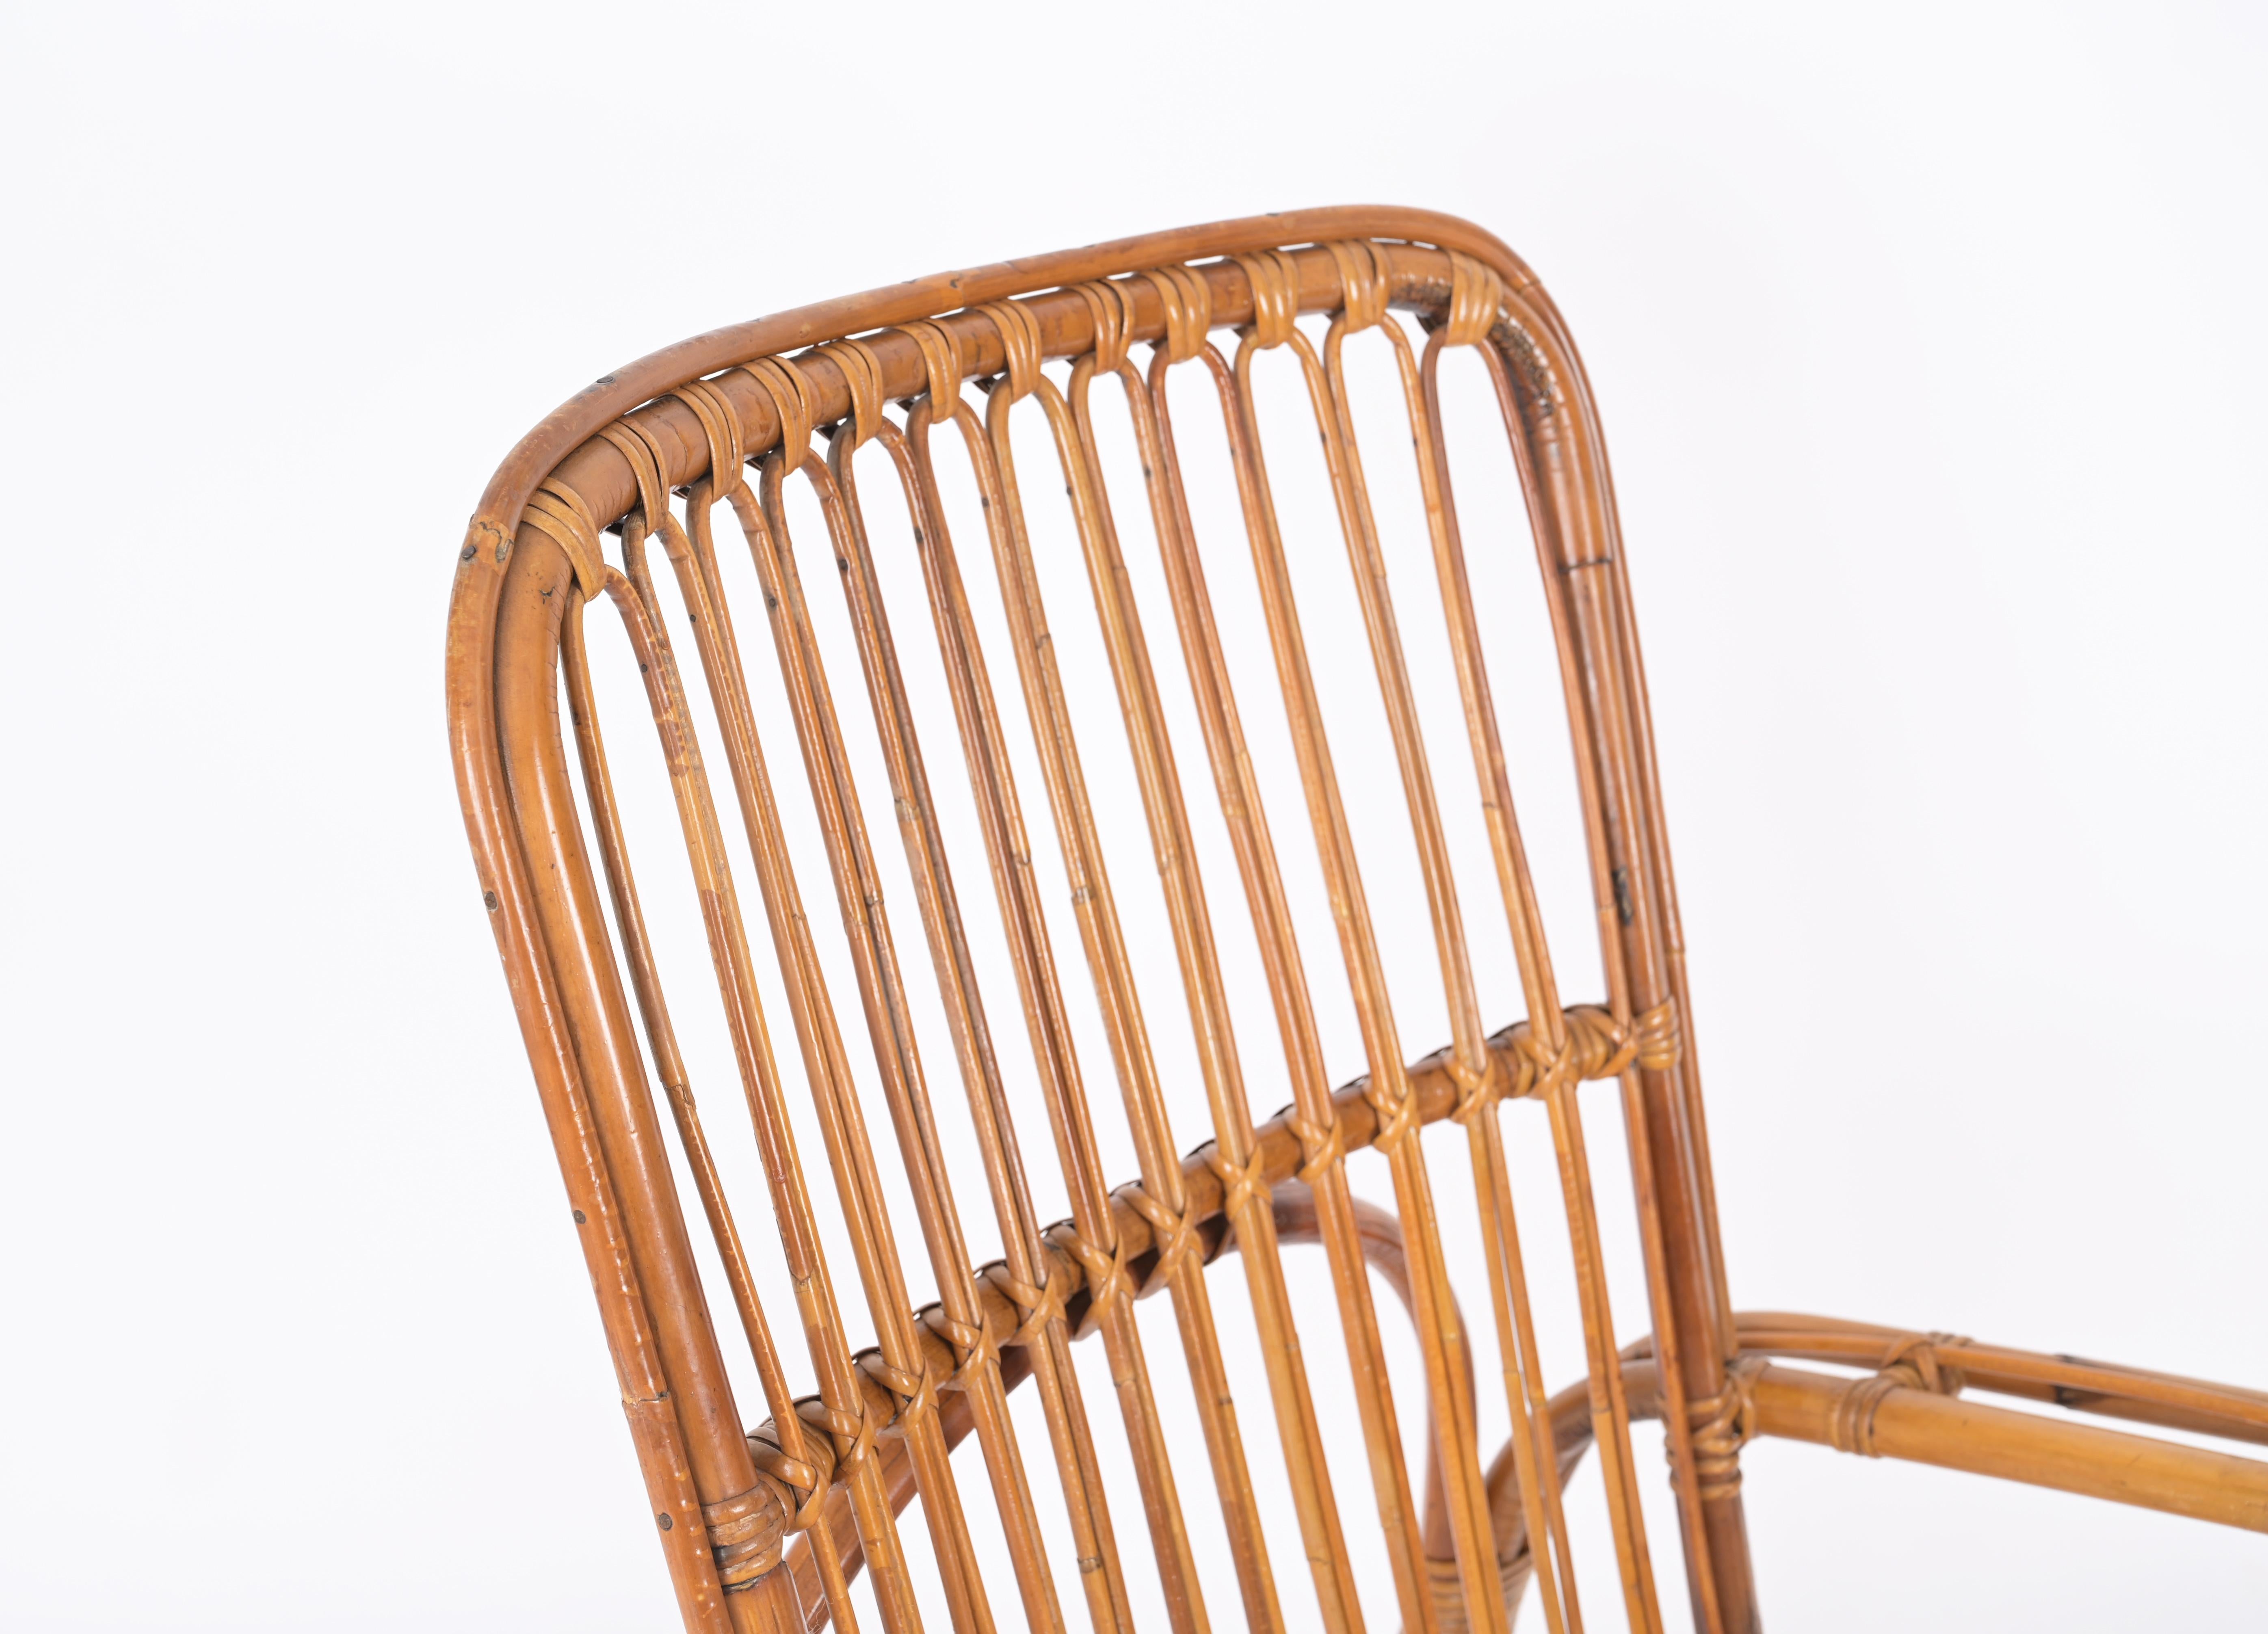 Pair of Midcentury Italian Armchairs in Rattan and Wicker, Tito Agnoli, 1960s For Sale 2